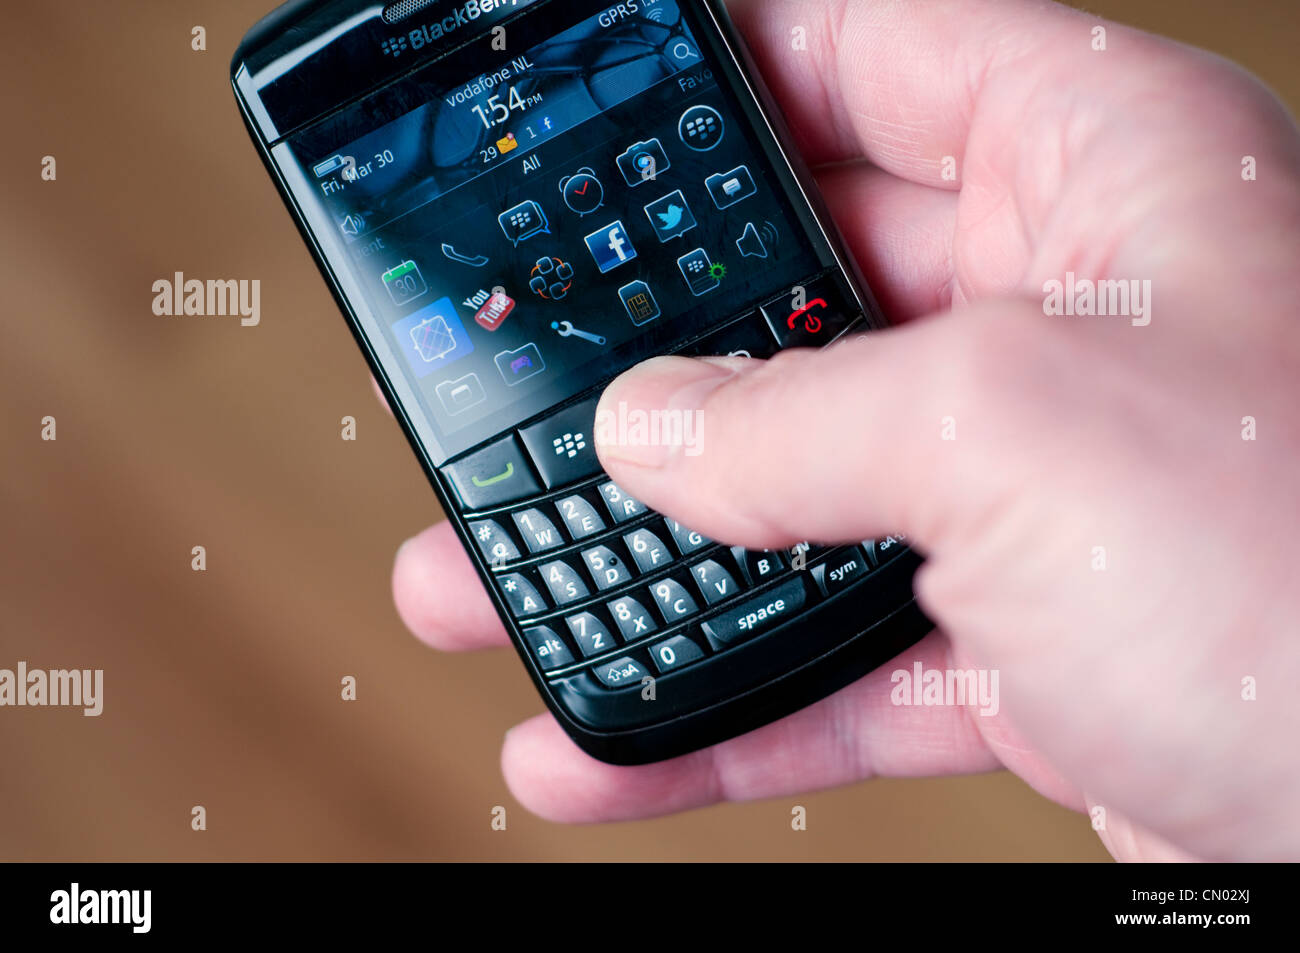 Someone using a BlackBerry mobile phone Stock Photo